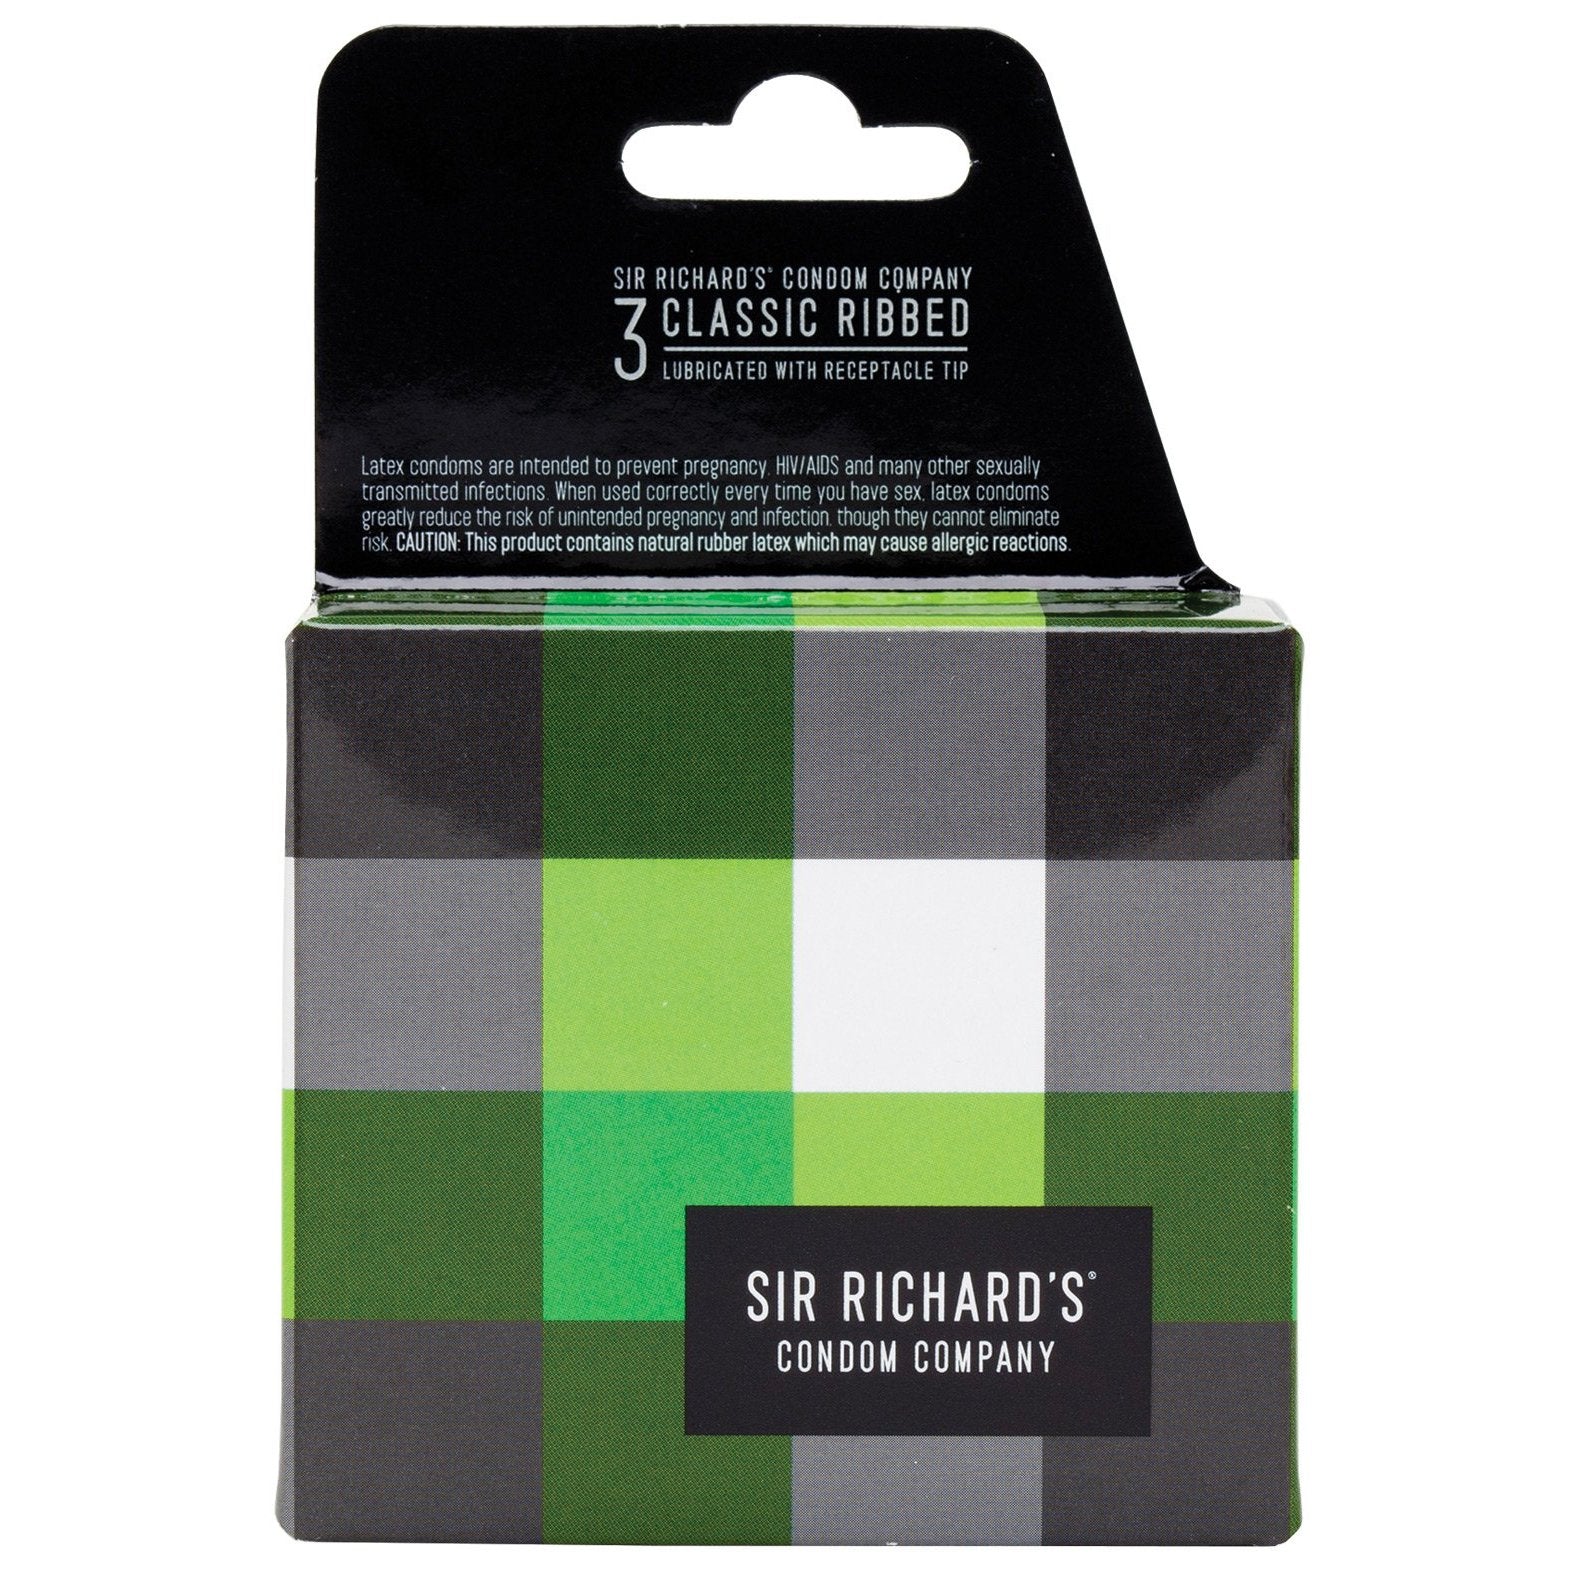 Sir Richard's Classic Ribbed Condom - Pack of 3